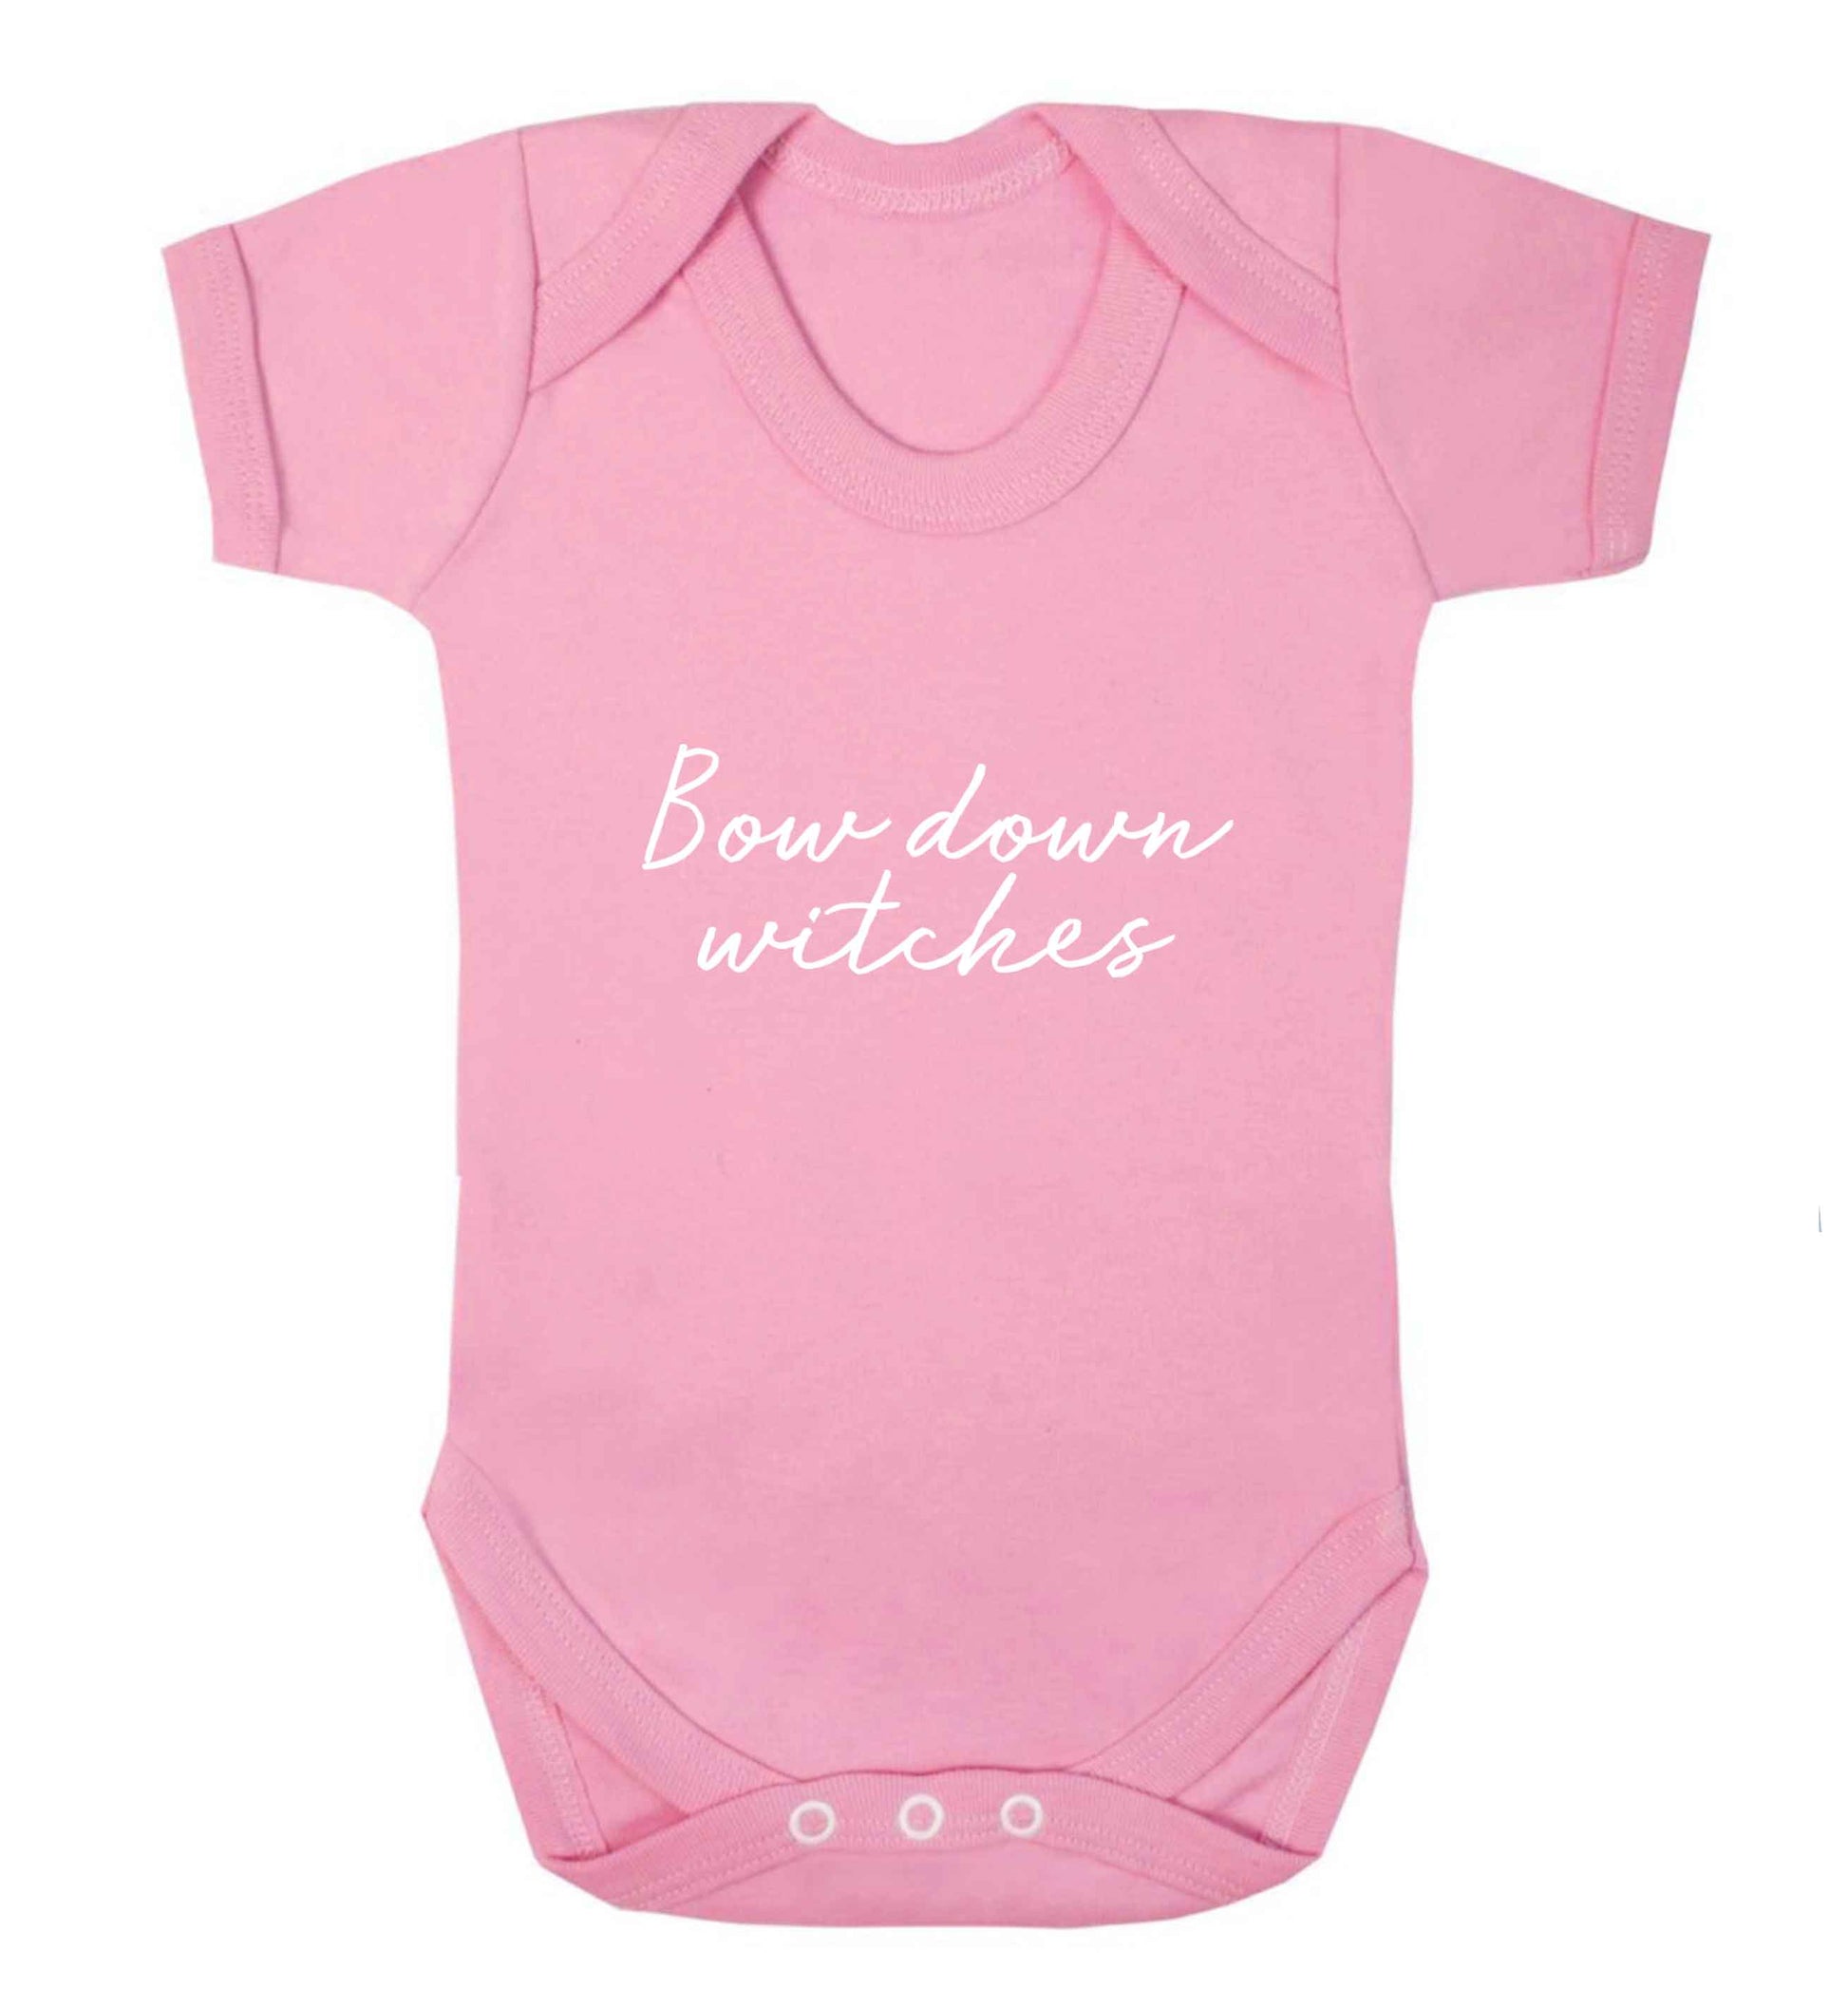 Bow down witches baby vest pale pink 18-24 months